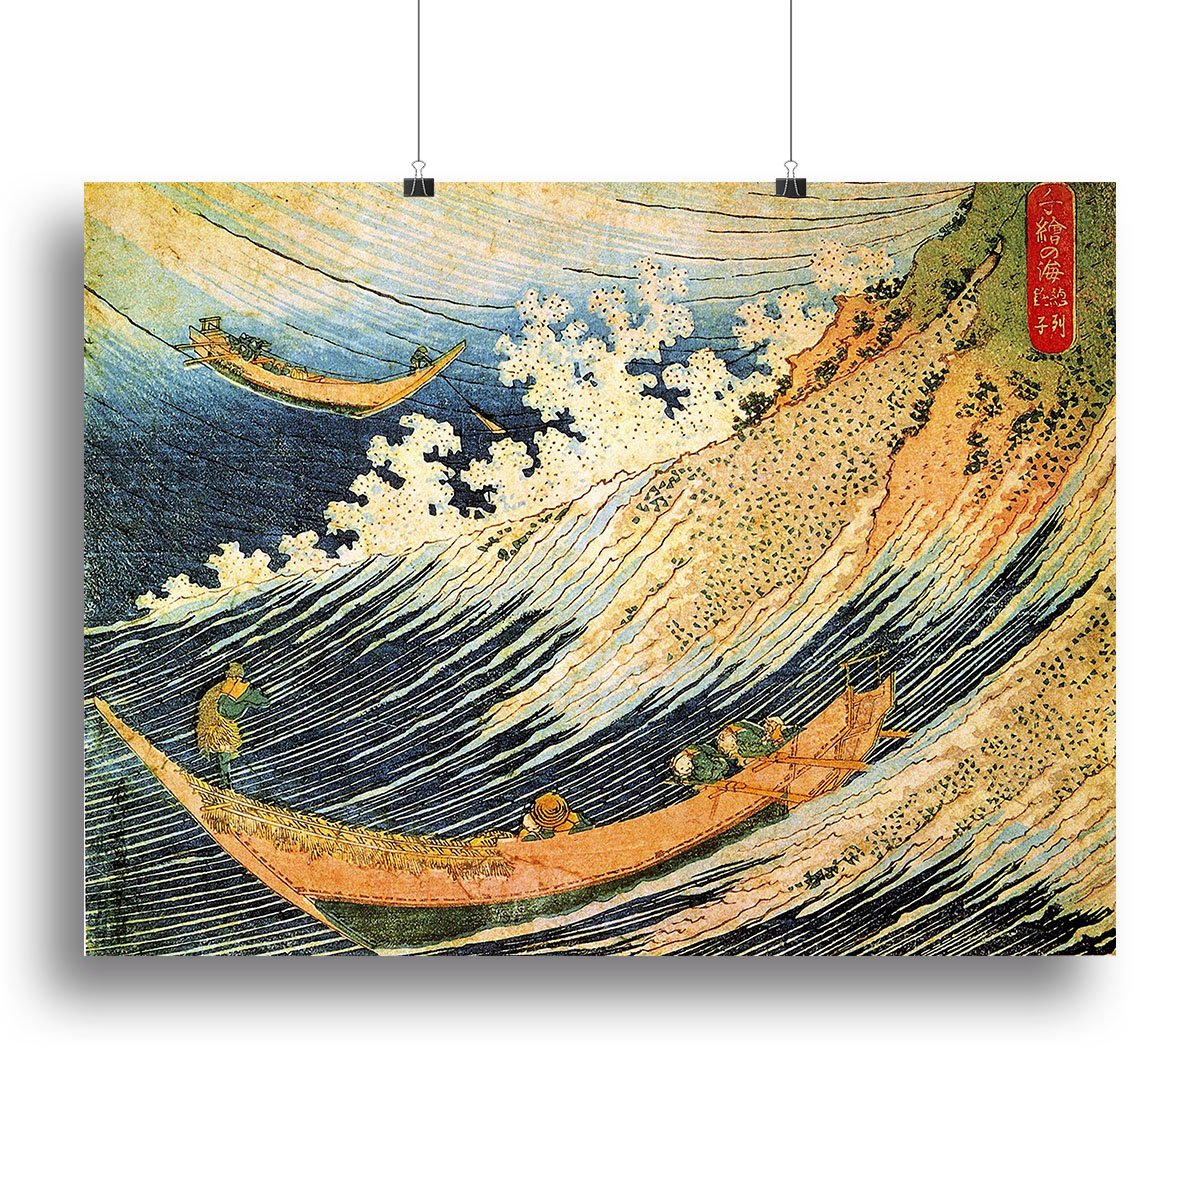 Ocean landscape 2 by Hokusai Canvas Print or Poster